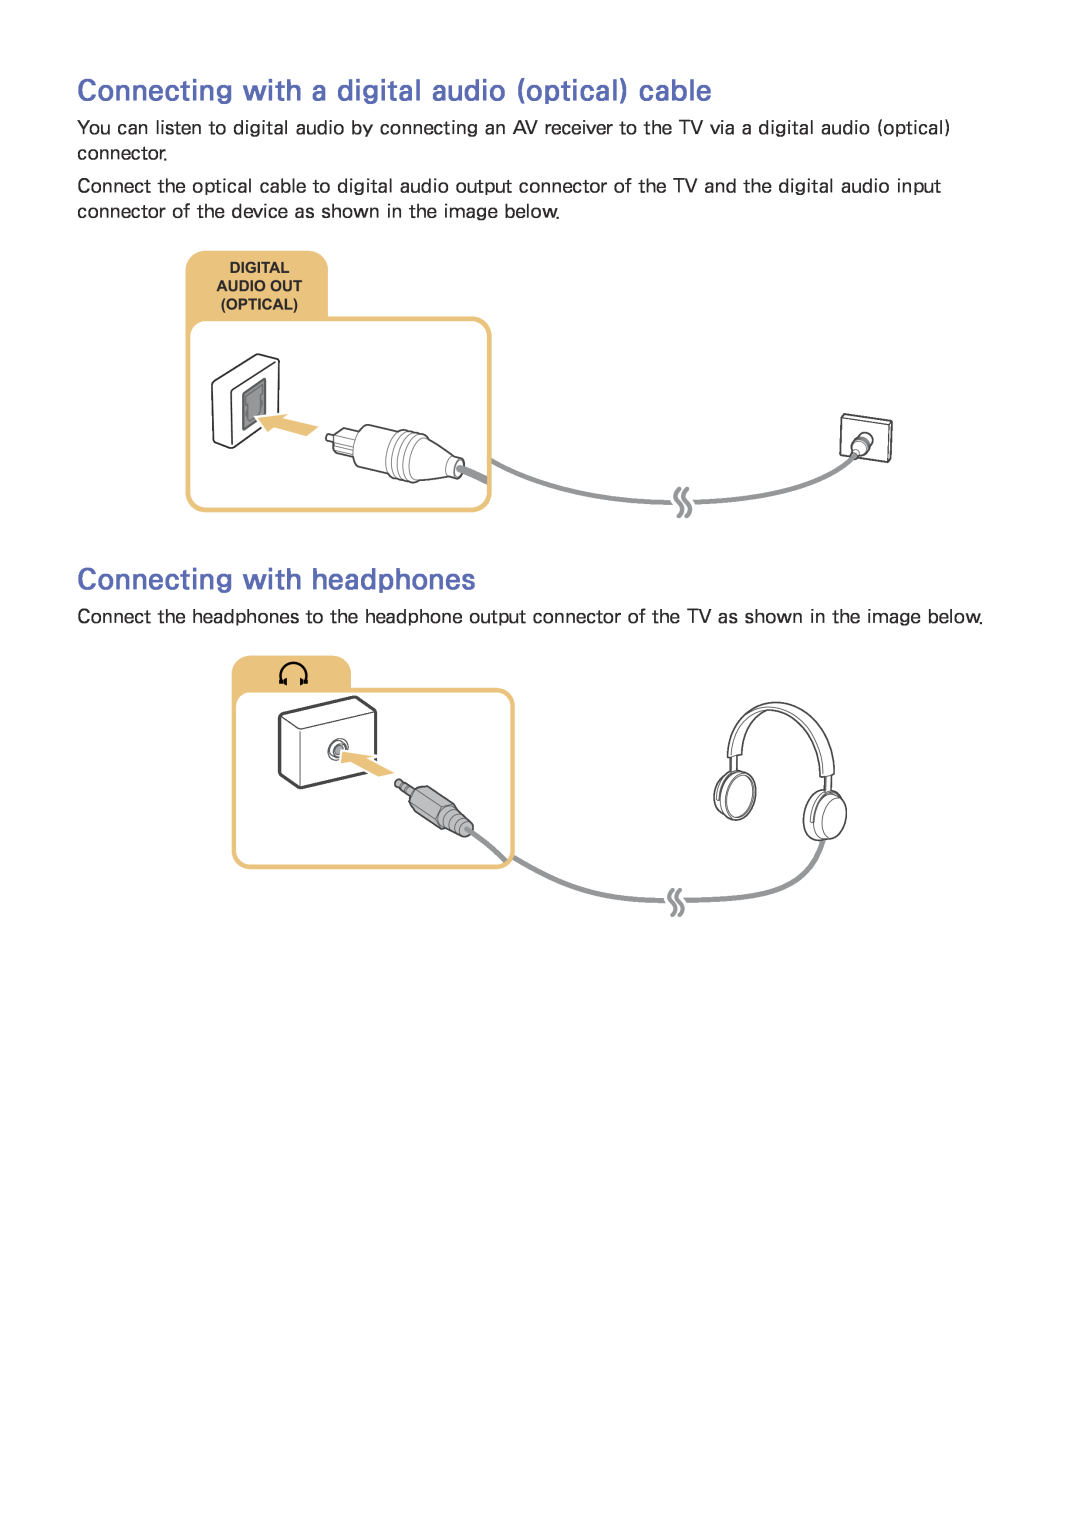 Samsung UE40JU6640UXZG, UE40JU6495UXZG manual Connecting with a digital audio optical cable, Connecting with headphones 